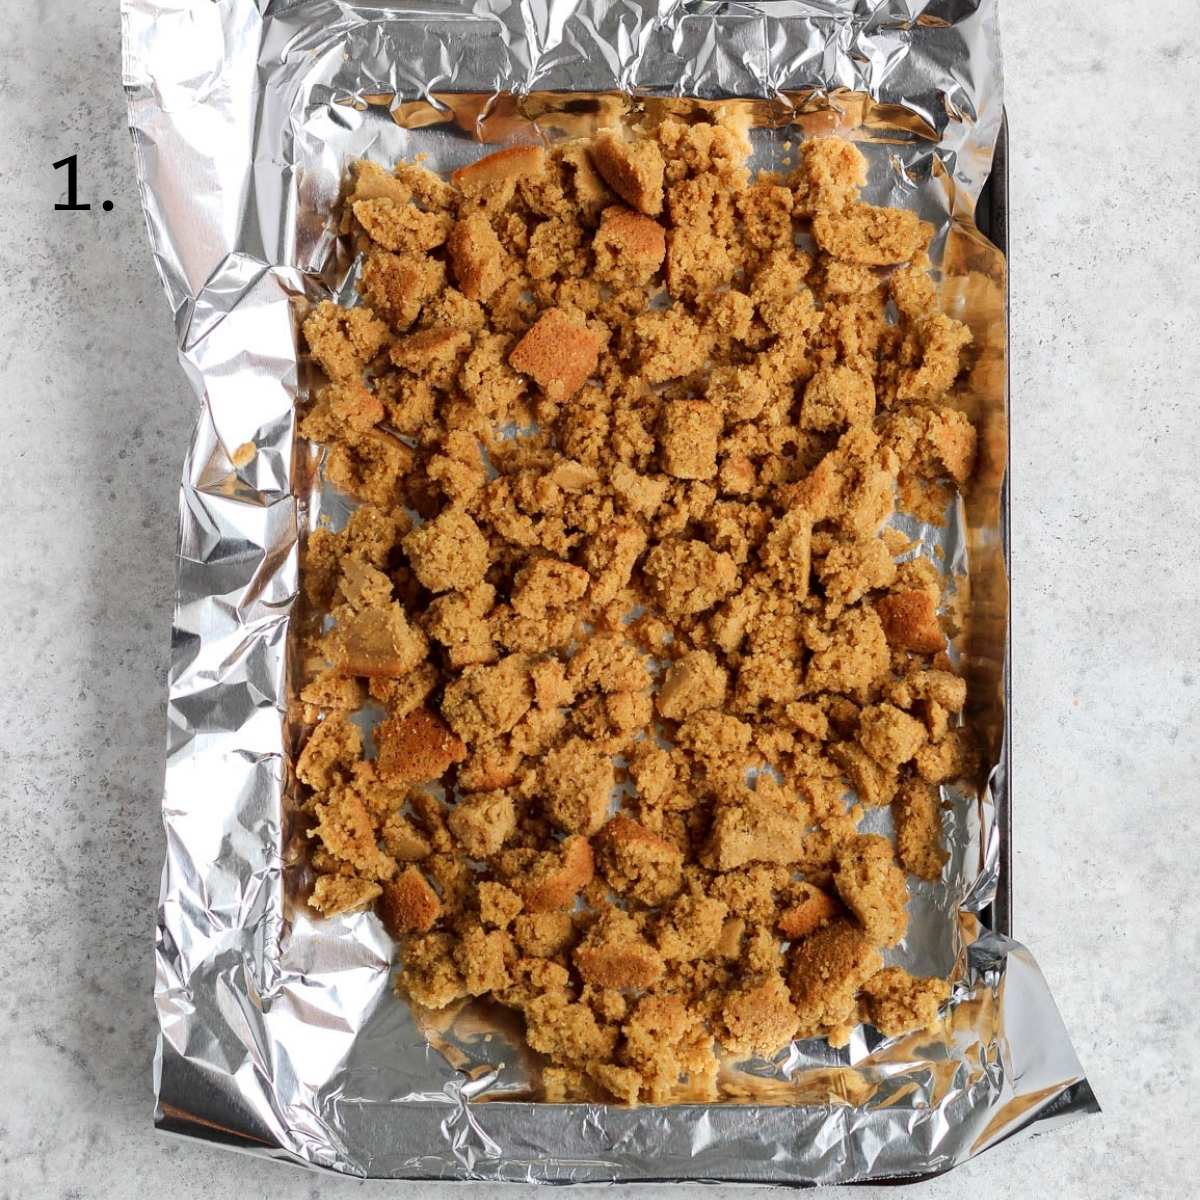 A cookie sheet lined with foil filled with gluten free cornbread crumbled on top.